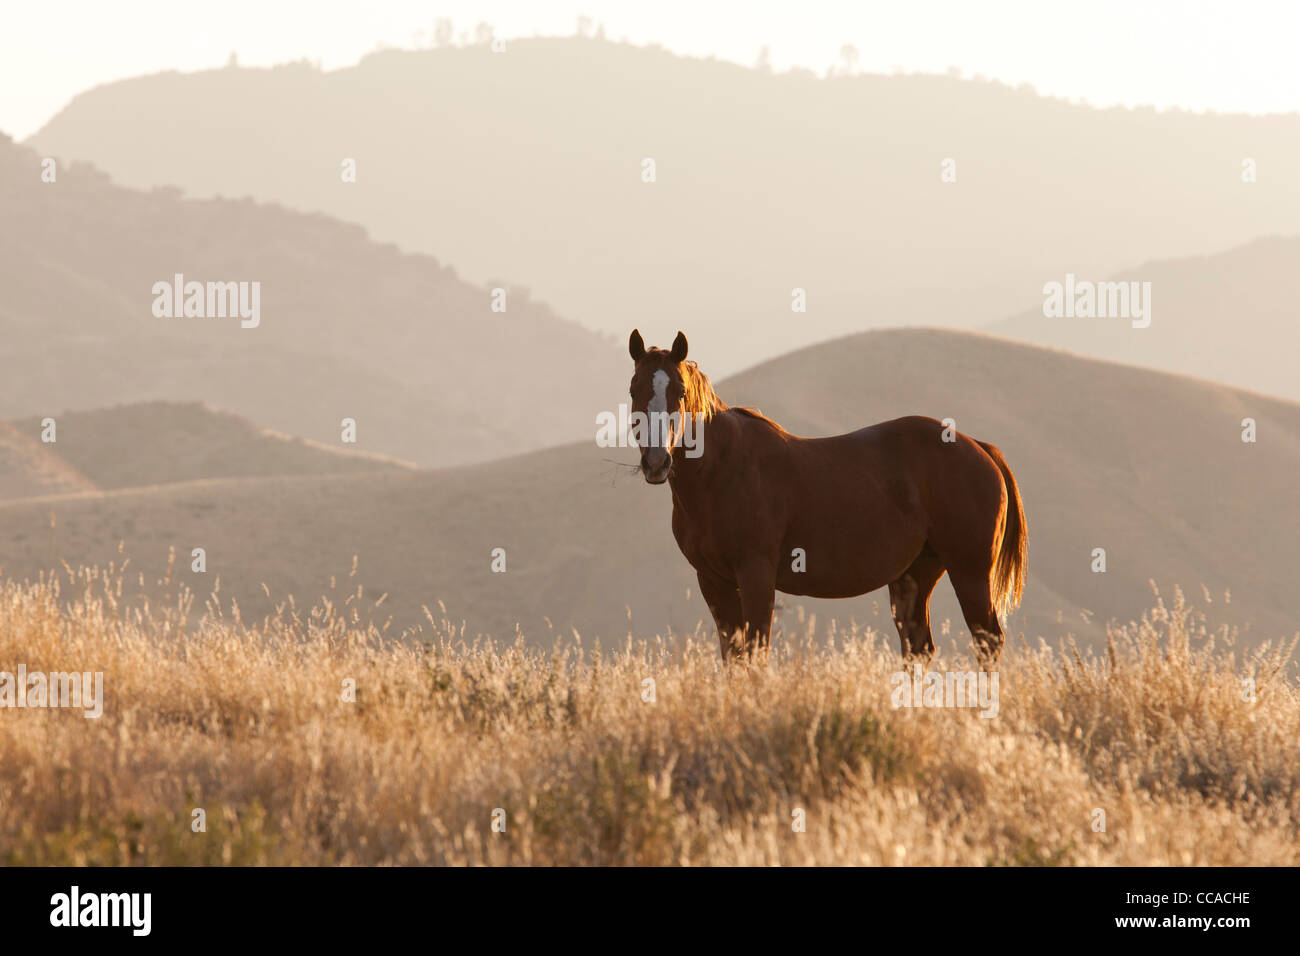 Wild horse standing on hill Banque D'Images